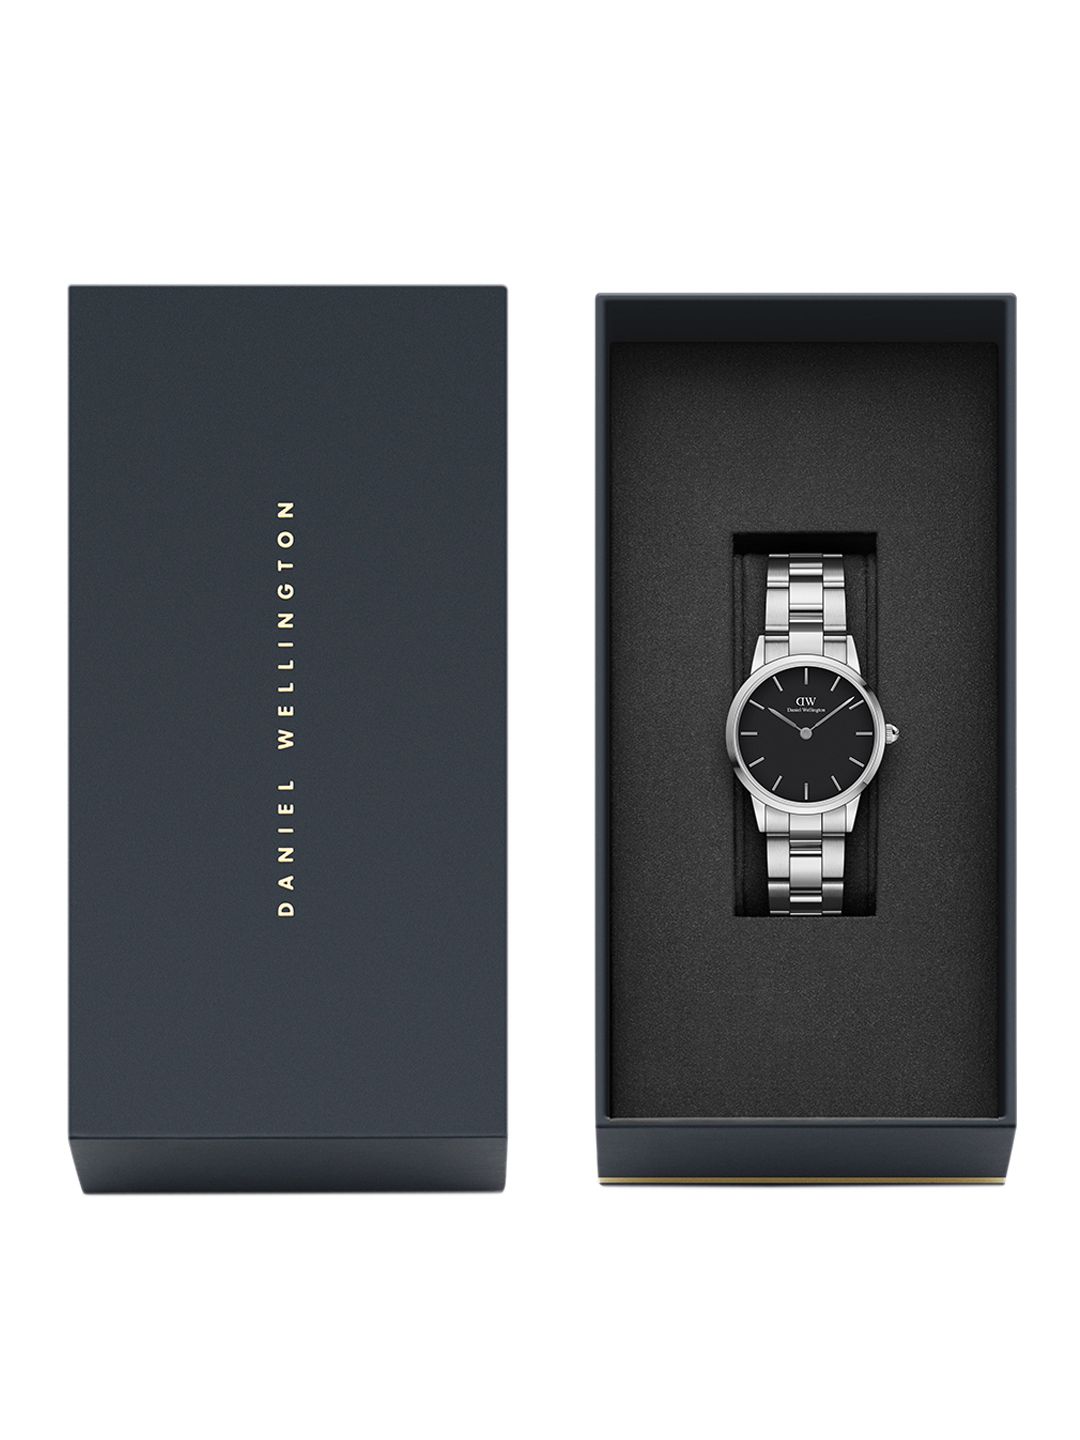 Daniel wellington Women Iconic Link 28mm Silver Black Dial Watch DW00100208 Price in India